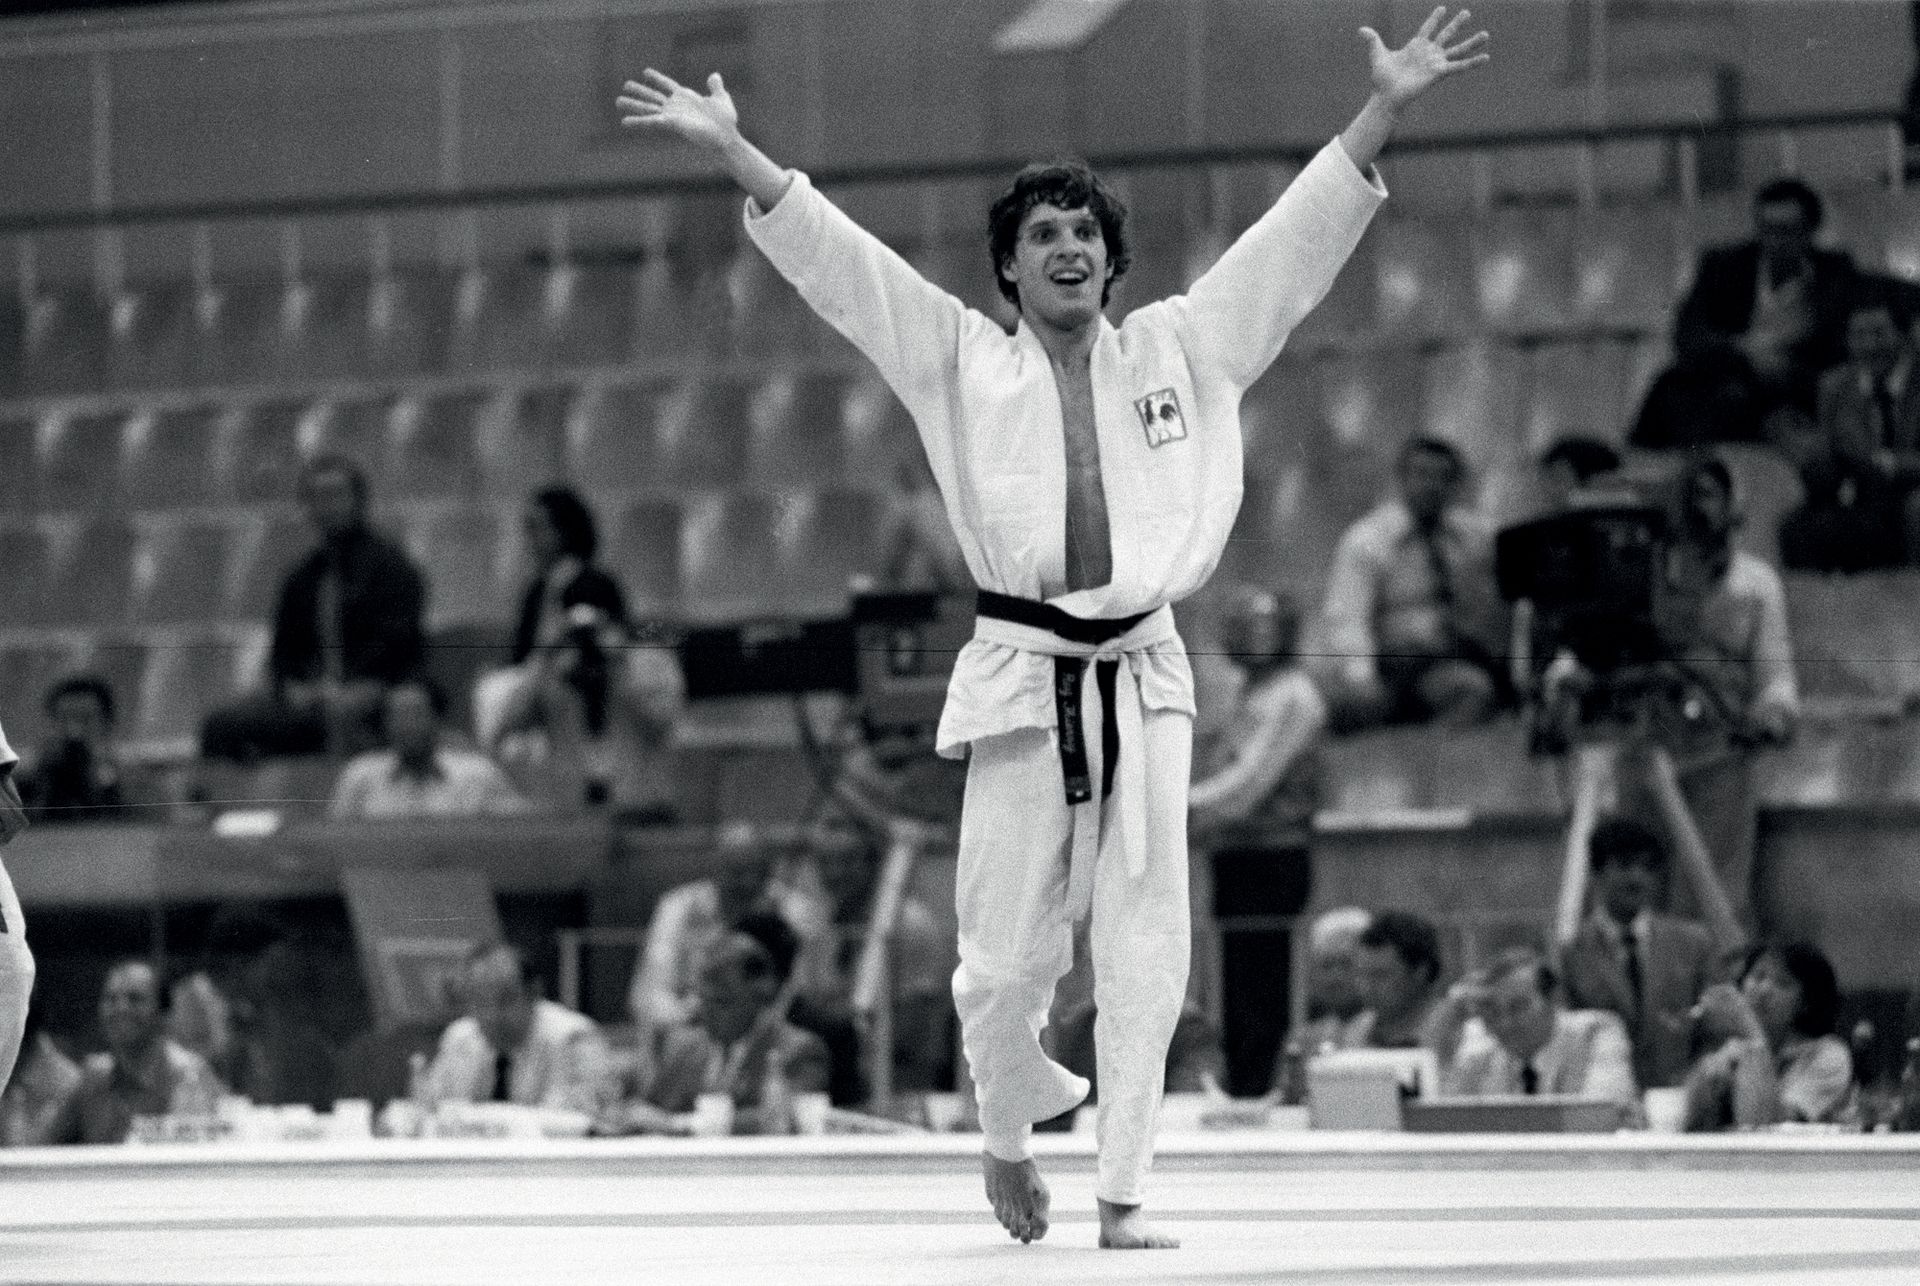 Null Moscow 1980. Thierry Rey, judo © Robert Legros/L'Équipe 1 August 1980.
Supe&hellip;